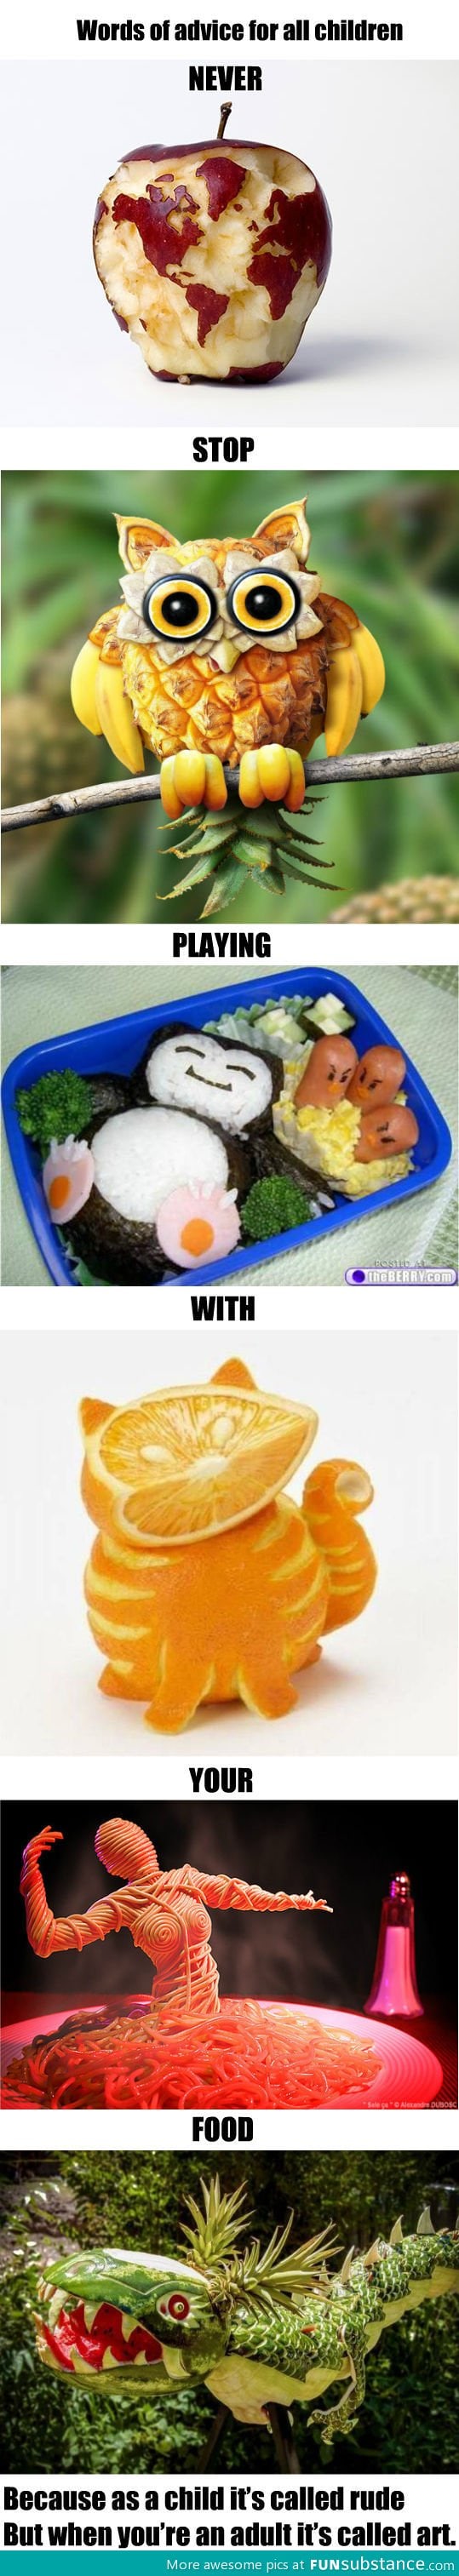 Kids, play with your food